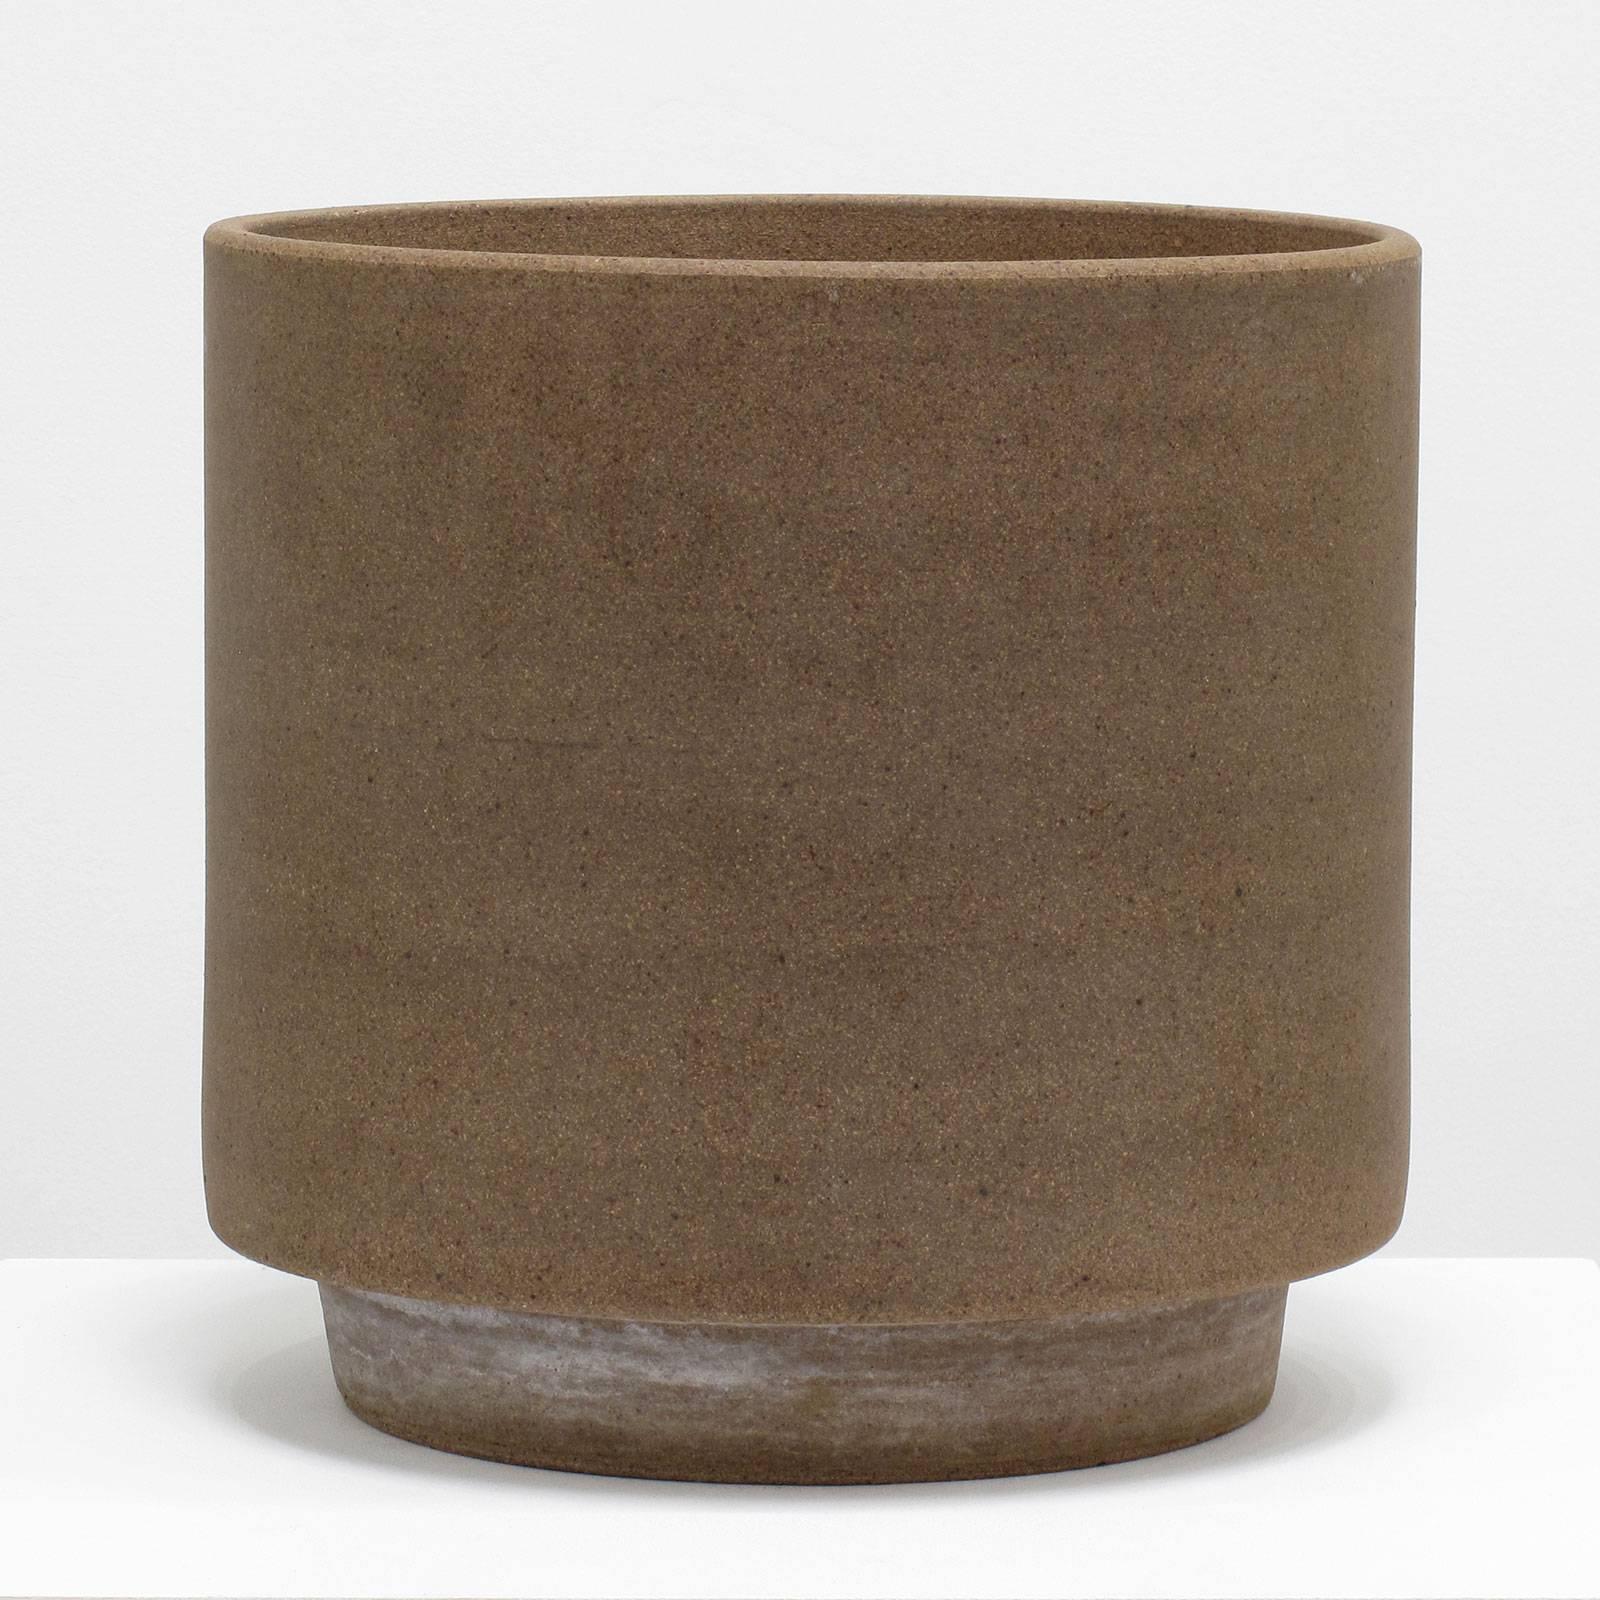 Hand-Crafted David Cressey Ceramic Planter, 1960s, California Modern Architectural Pottery For Sale